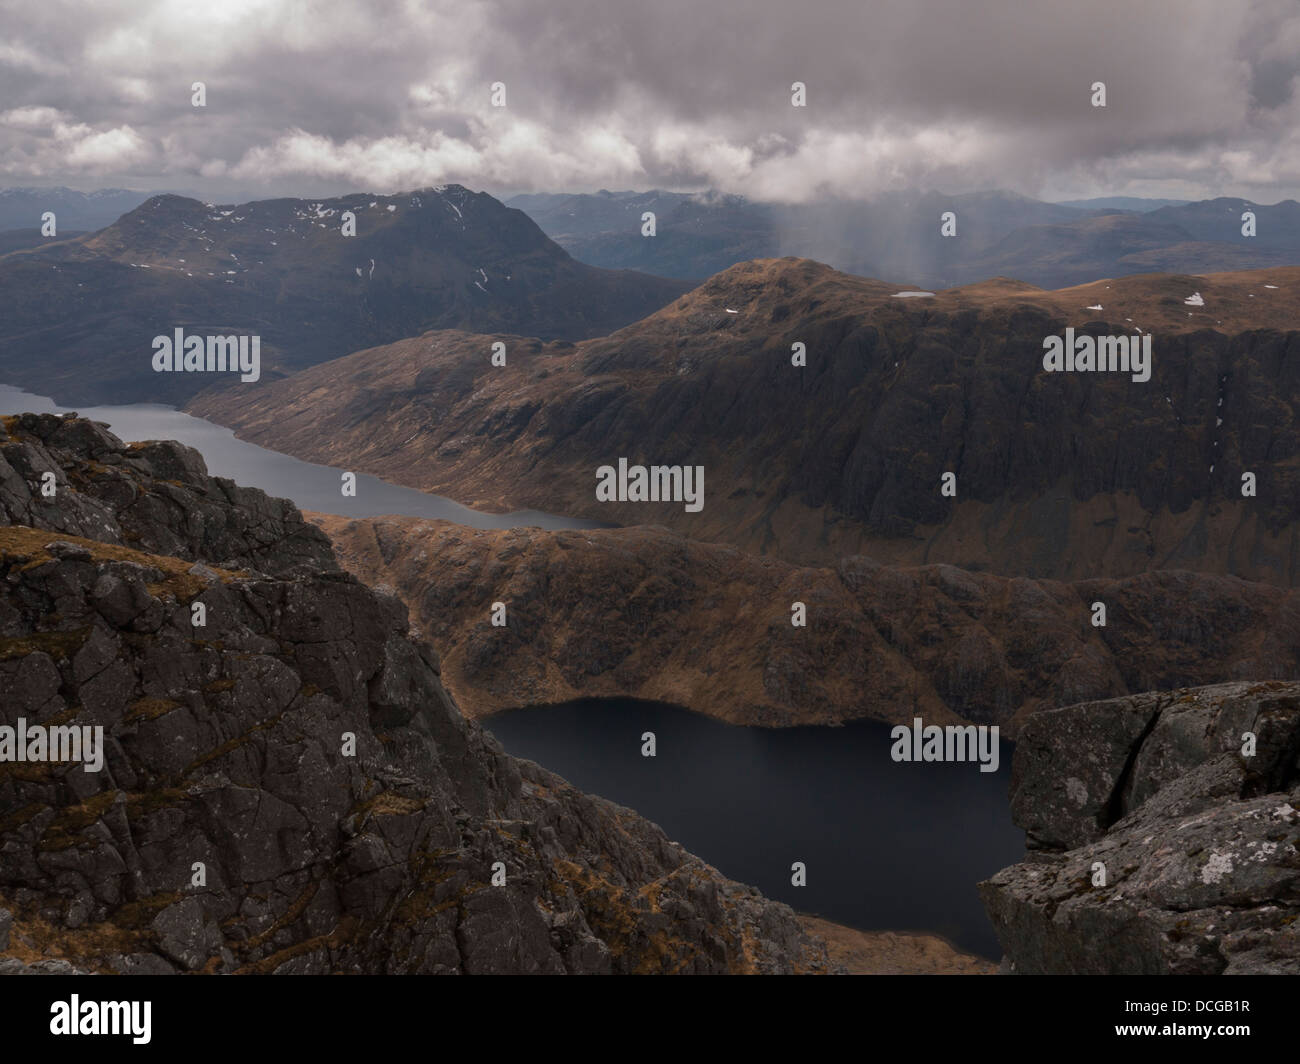 View south from the summit of A' Mhaighdean looking towards the mountain called 'Slioch', Scottish Highlands, Scotland UK Stock Photo